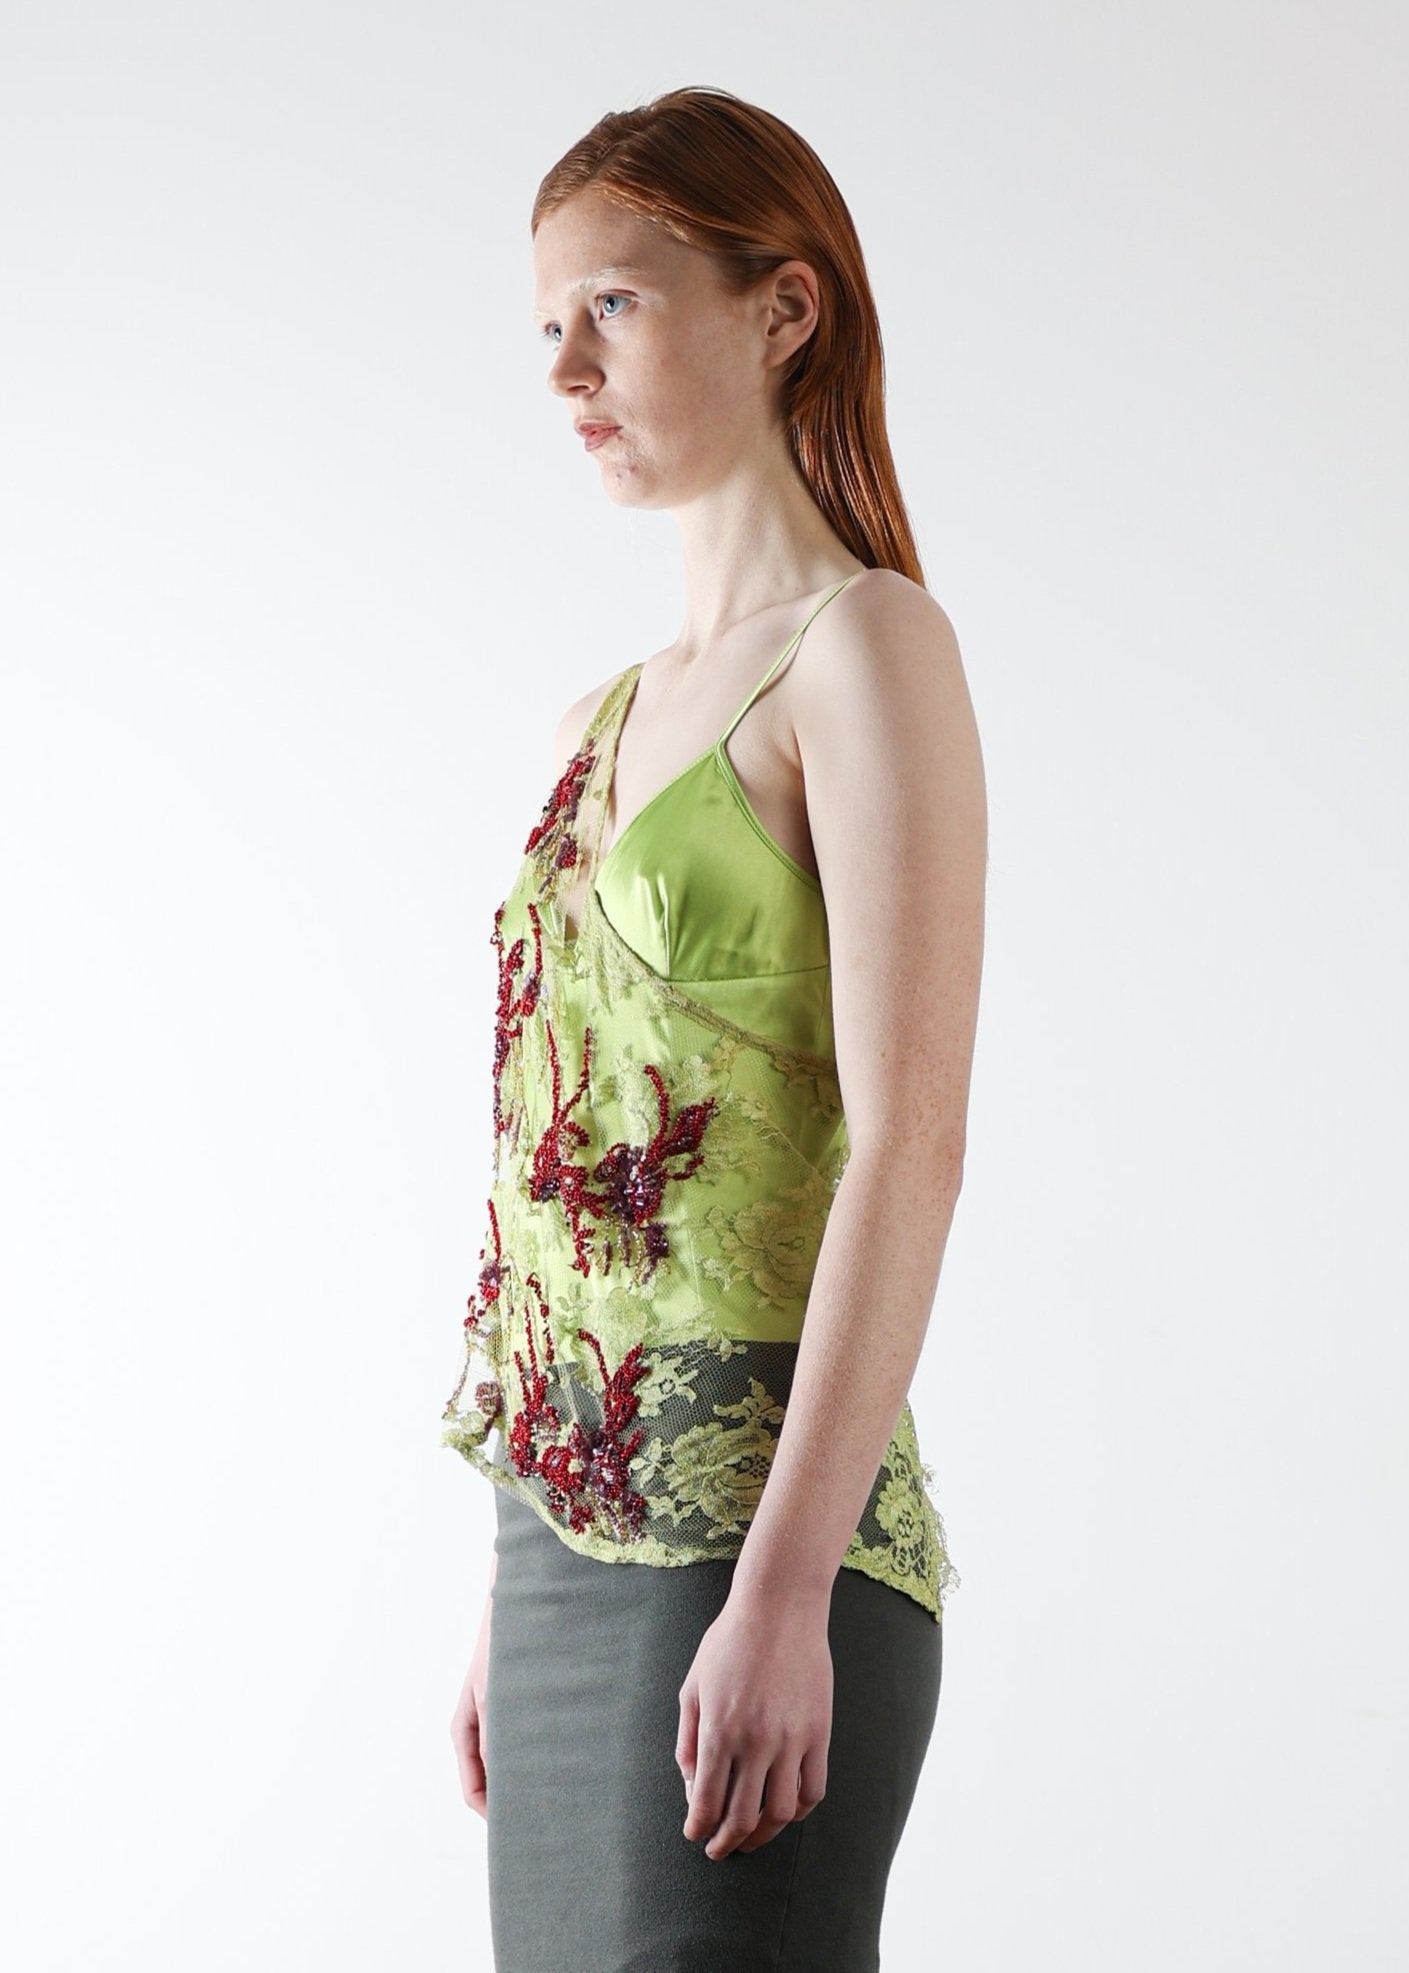 Jean Paul Gaultier Embroidered Lace top